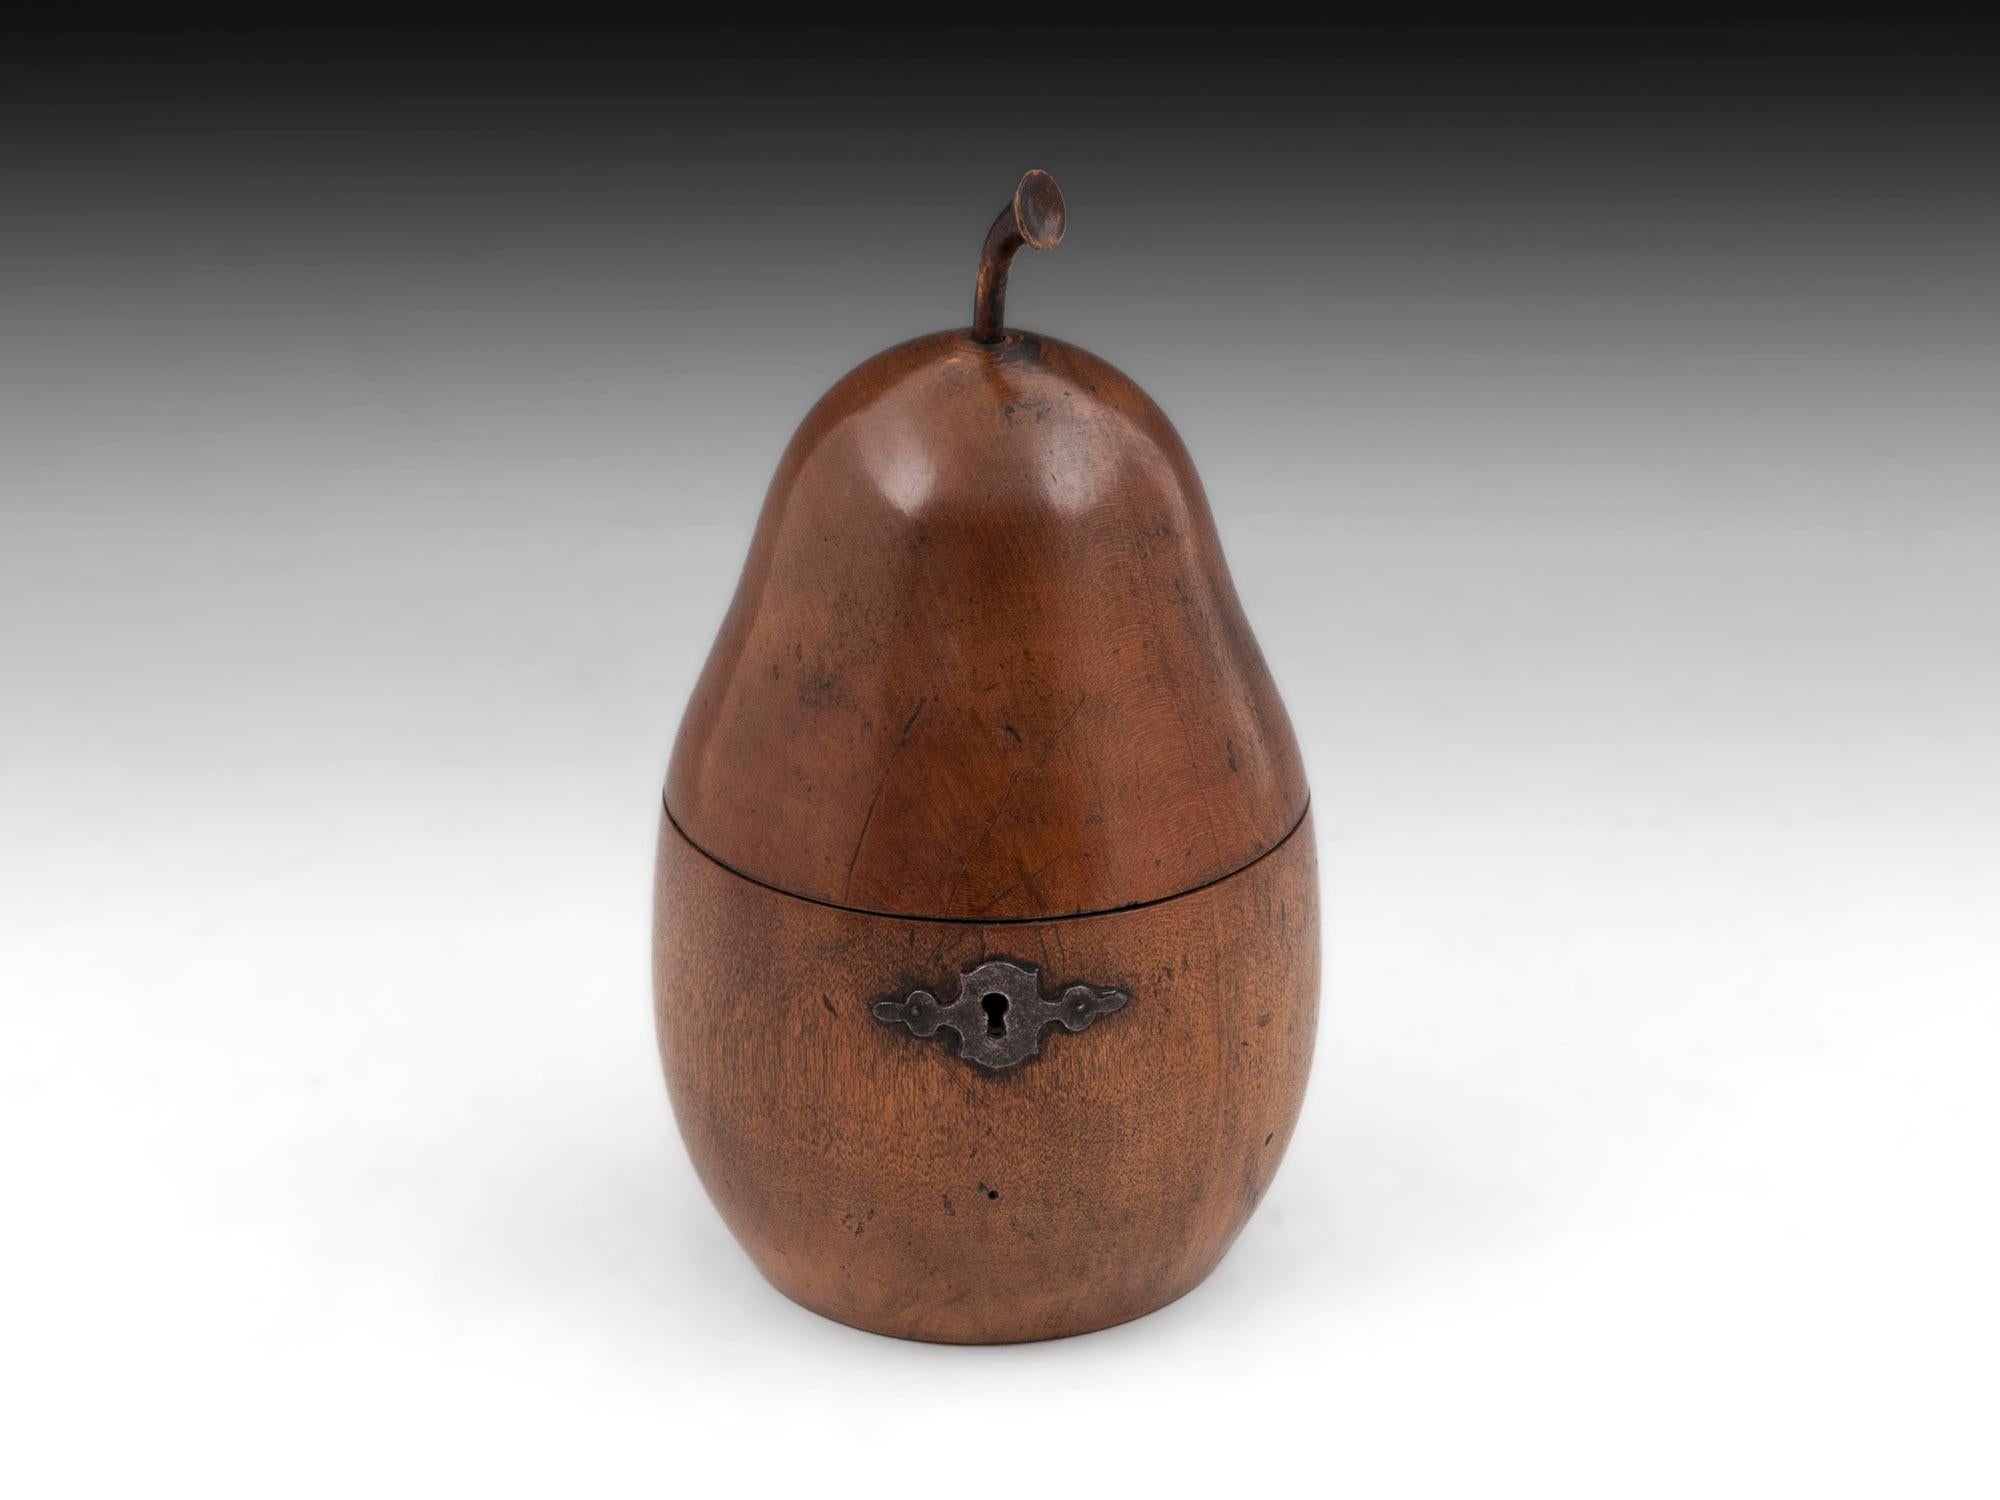 Antique tea caddy in the form of a Pear, with beautiful shape and patination topped with a realistic turned stalk. With steel hinge and ornate escutcheon.